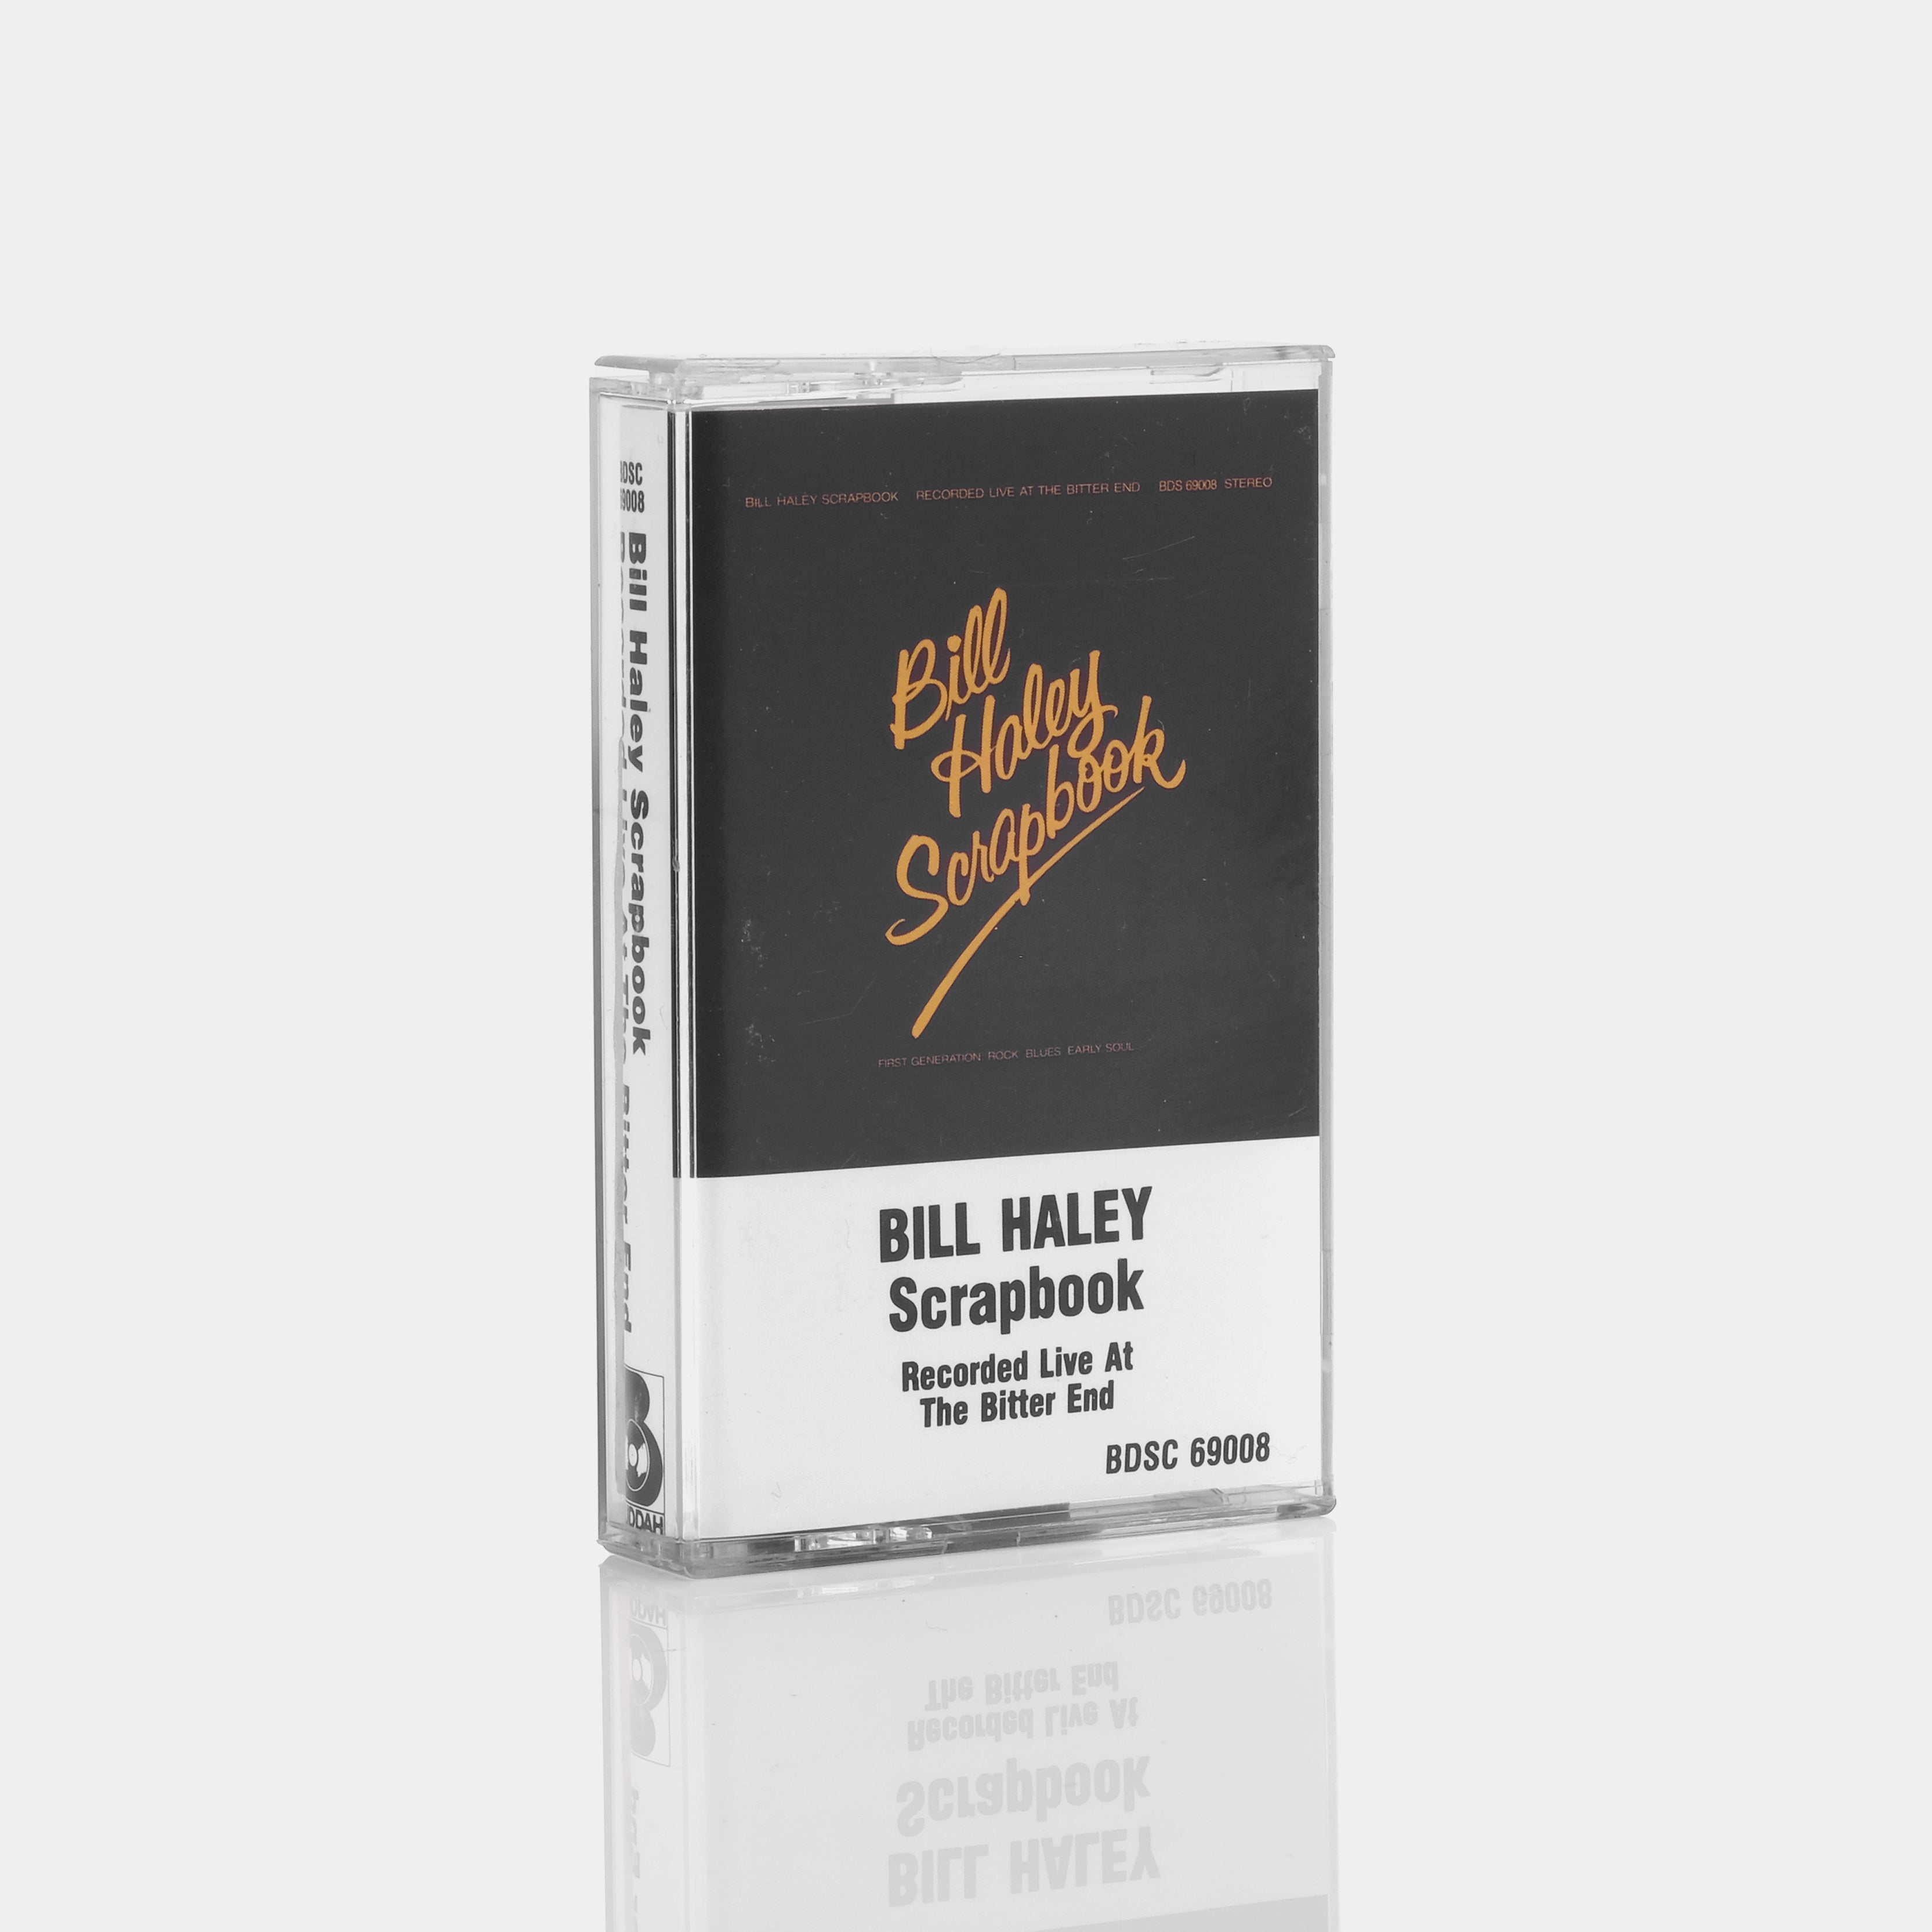 Bill Haley Scrapbook - Recorded Live At The Bitter End Cassette Tape